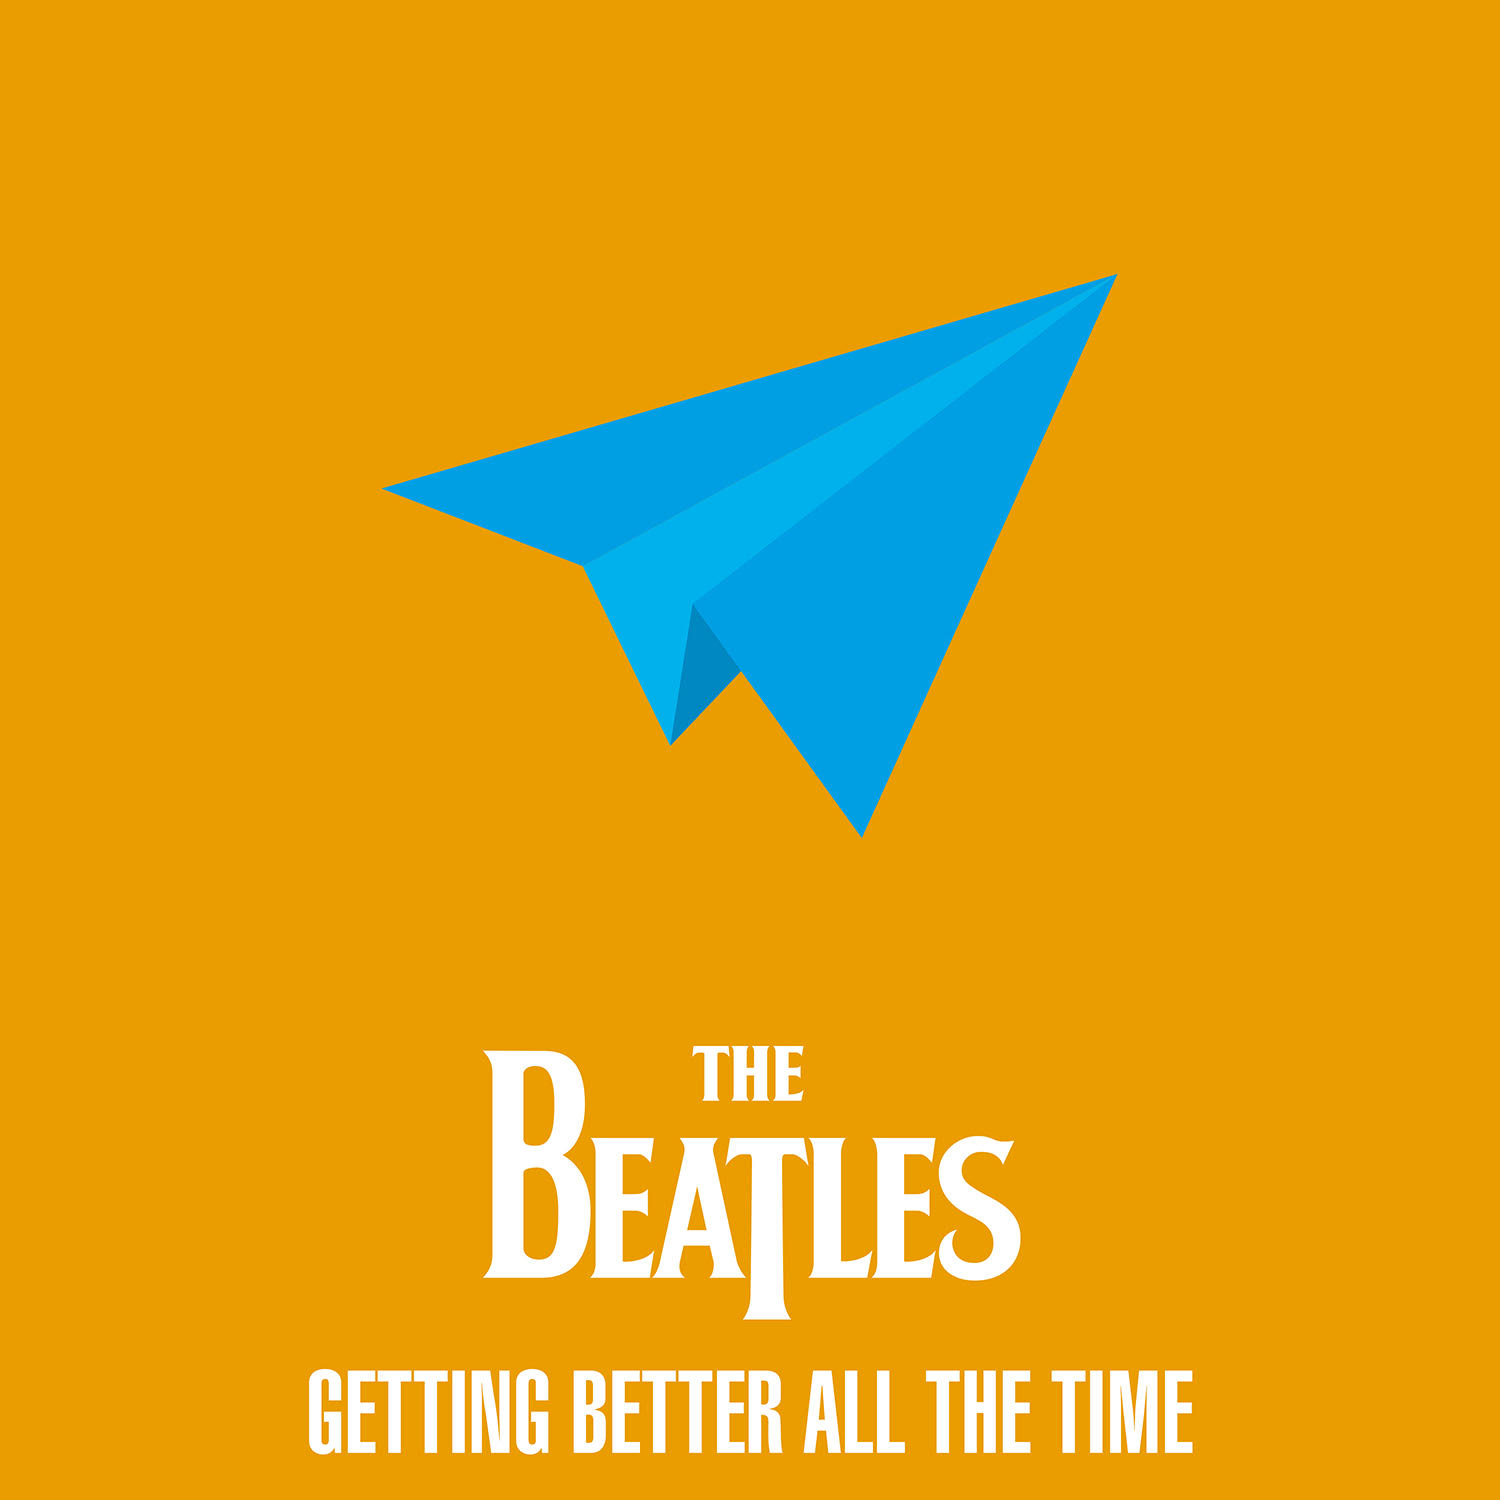 The Beatles on Twitter: "Take a listen to our new playlist Better All The Time - and tell us what Beatles songs you're playing to kick 2021 https://t.co/8C9tFmasBB https://t.co/6h7B9e7eCc" /